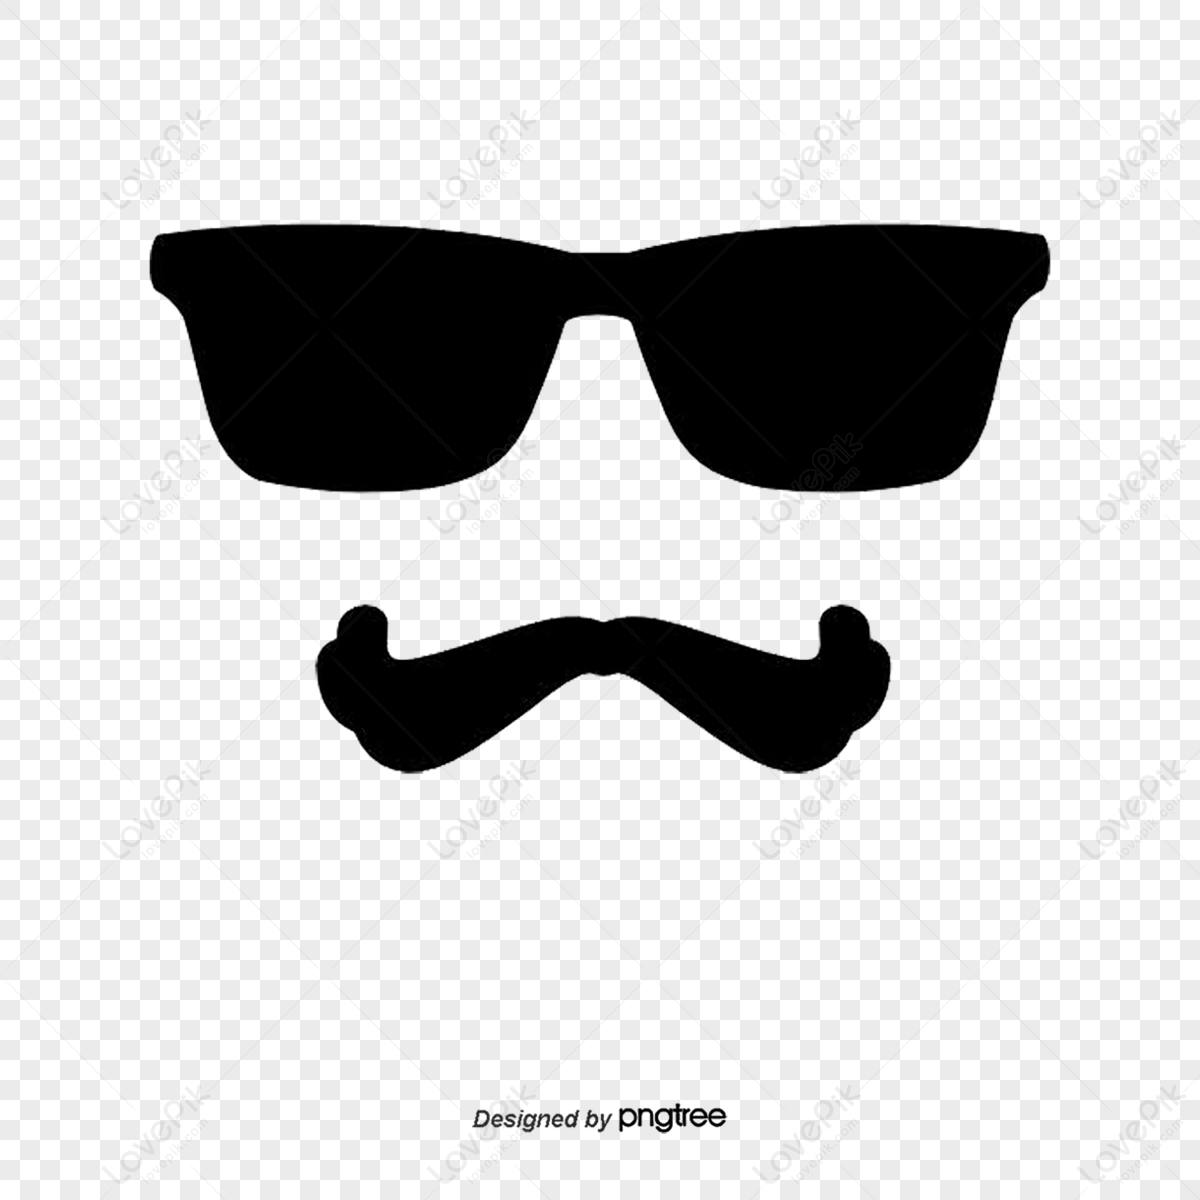 Man Face Images  Free Photos, HD Backgrounds, PNGs, Vectors